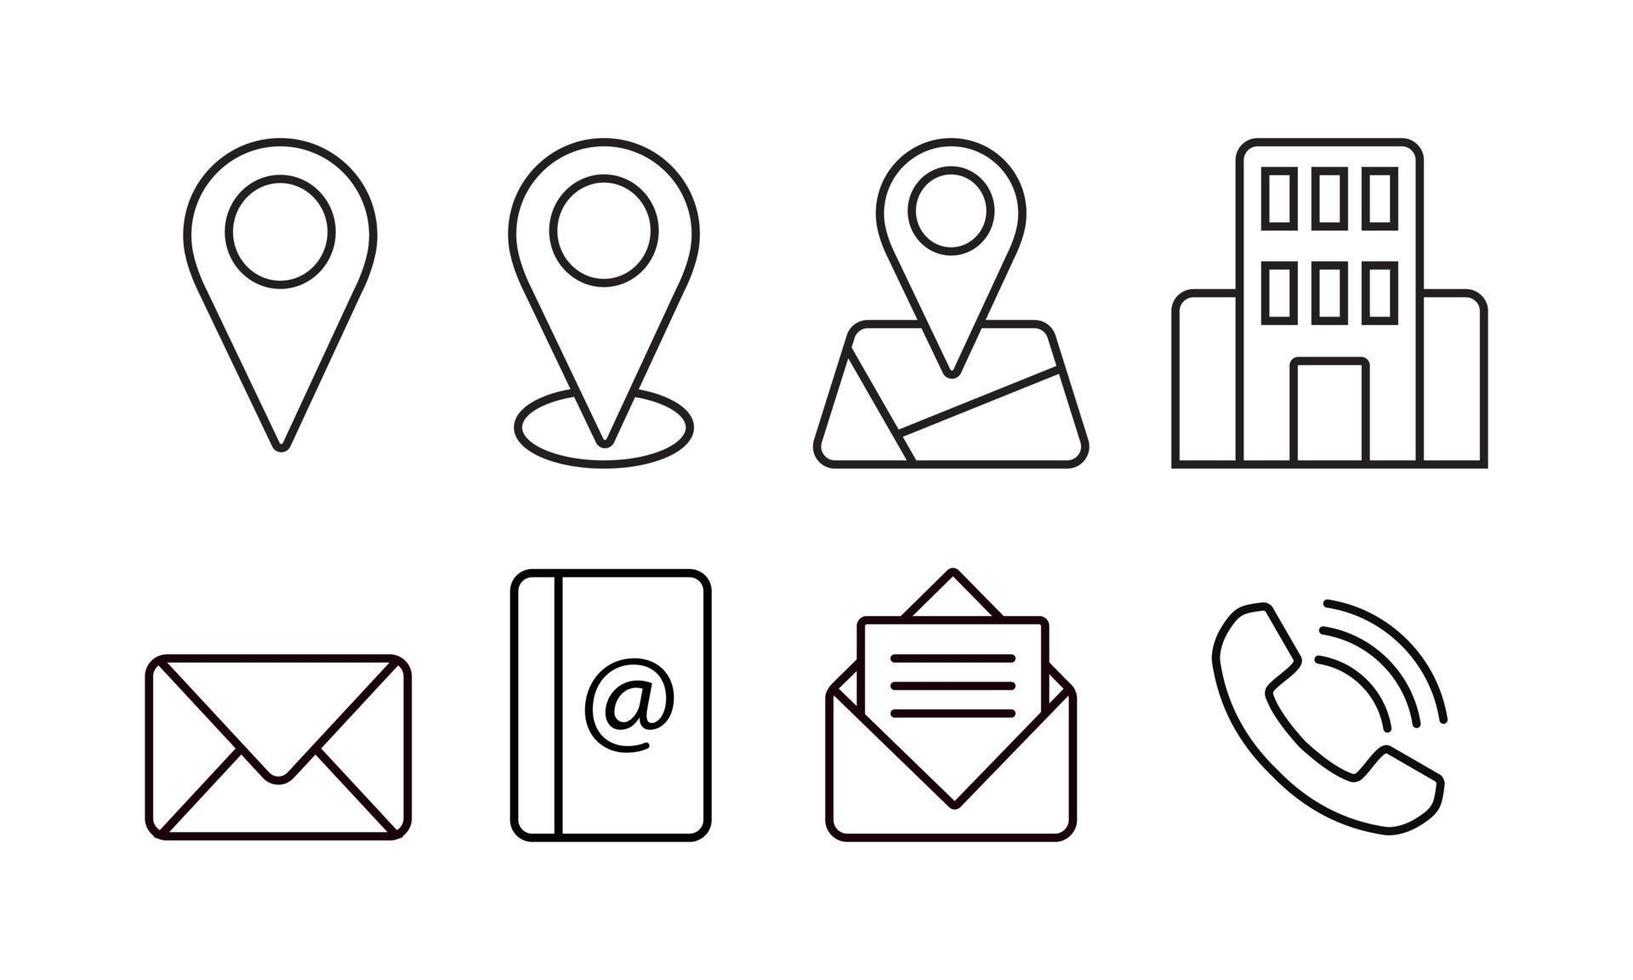 Outlined icon of business contact set. Suitable for design element of business card, personal identity information, and company profile symbol. Simple contact icon collection. vector